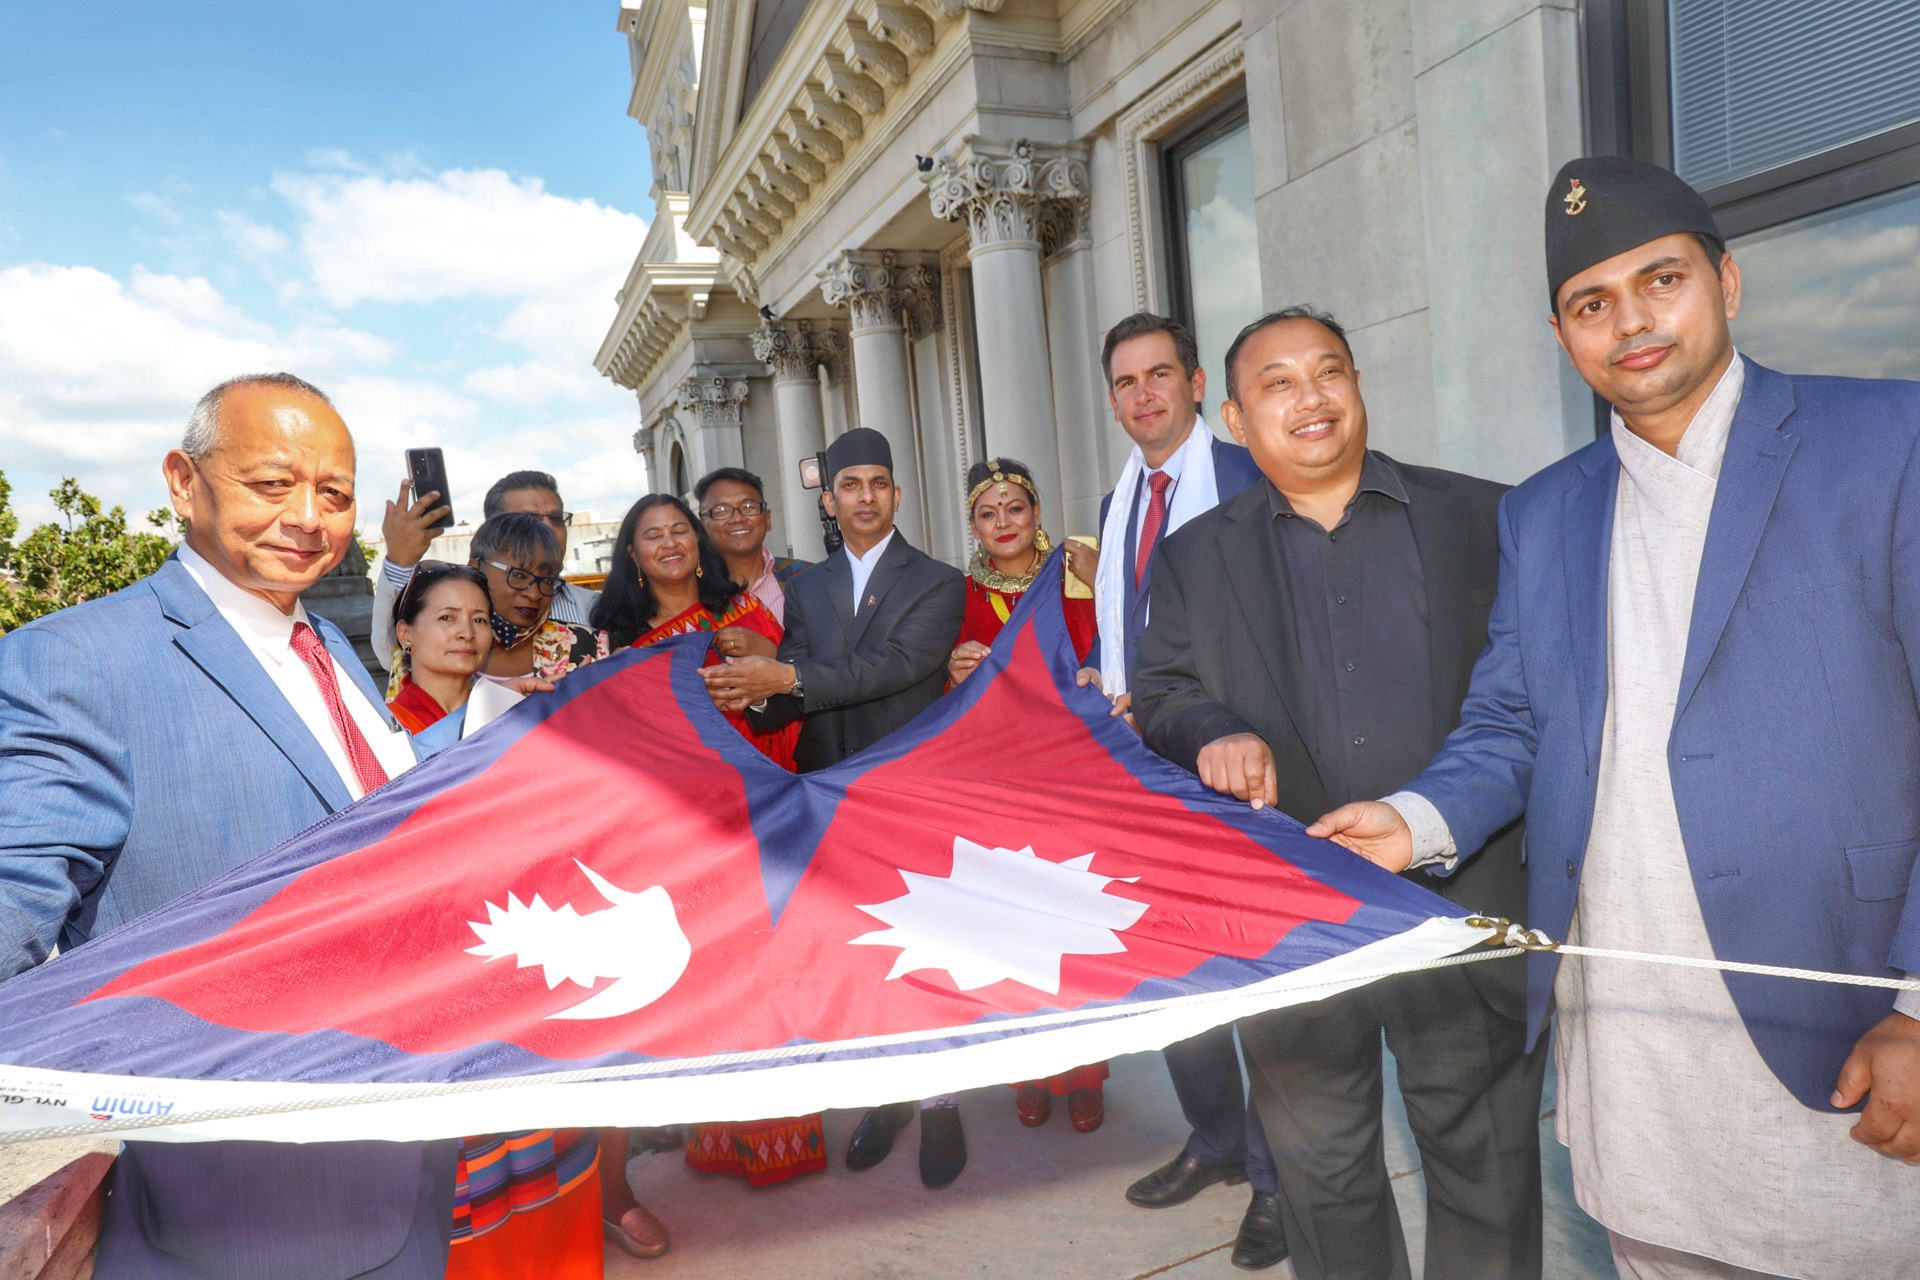 Several citizens are pictured holding the flag before it is raised The national flag of Nepal is a simplified combination of two single pennants. Its crimson red is the color of the rhododendron, the country's national flower. Red is also the sign of victory in war.